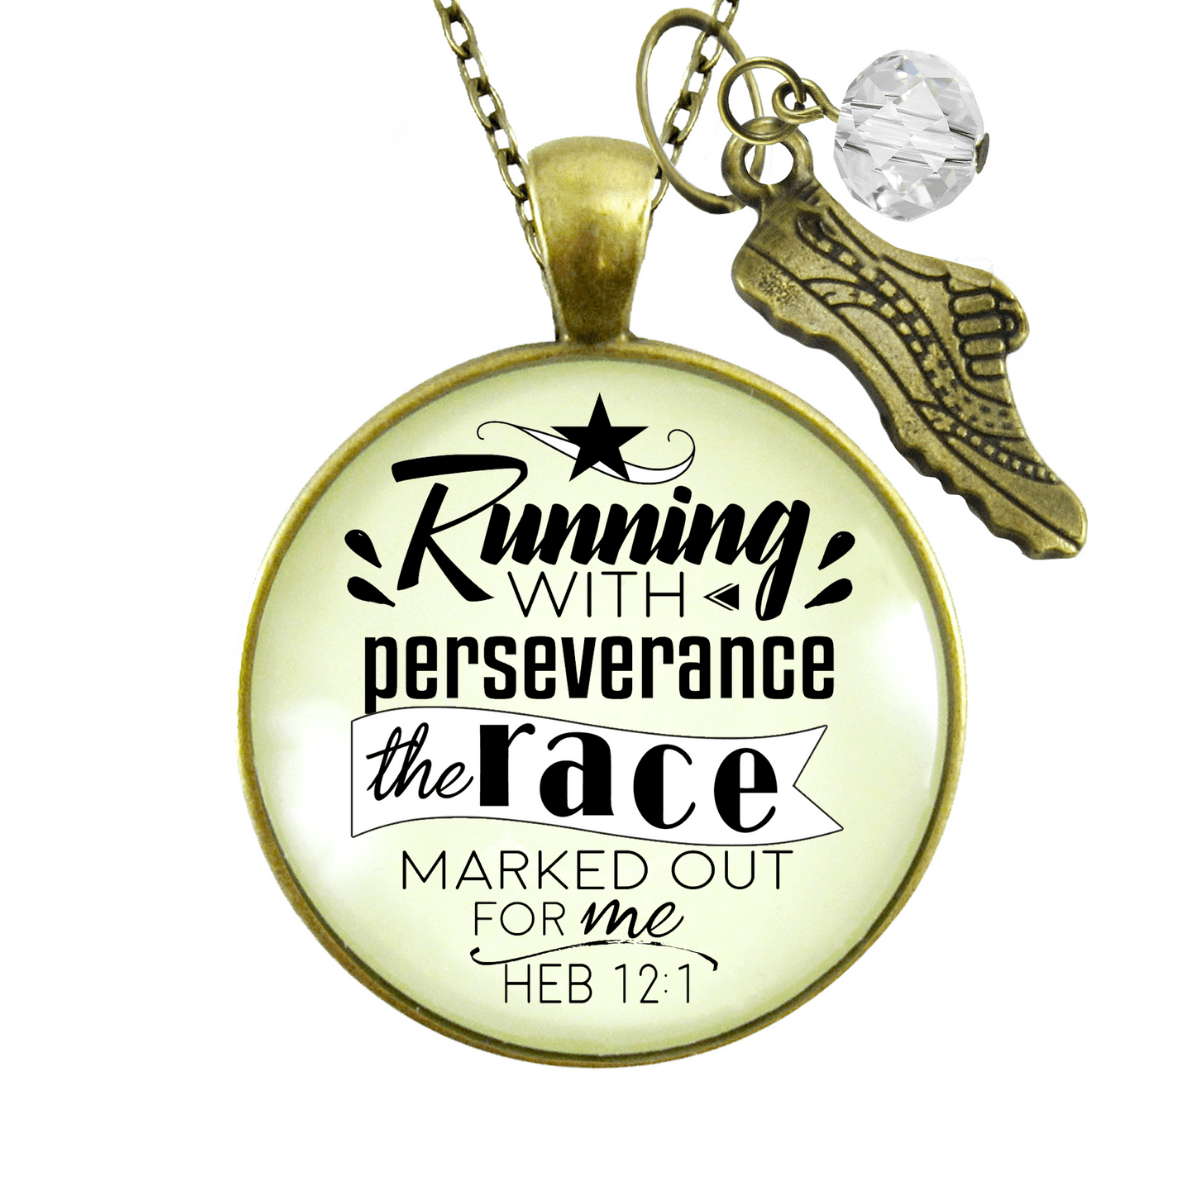 Gutsy Goodness Runners Necklace Run Perseverance Faith Marathon Jewelry - Gutsy Goodness Handmade Jewelry;Runners Necklace Run Perseverance Faith Marathon Jewelry - Gutsy Goodness Handmade Jewelry Gifts